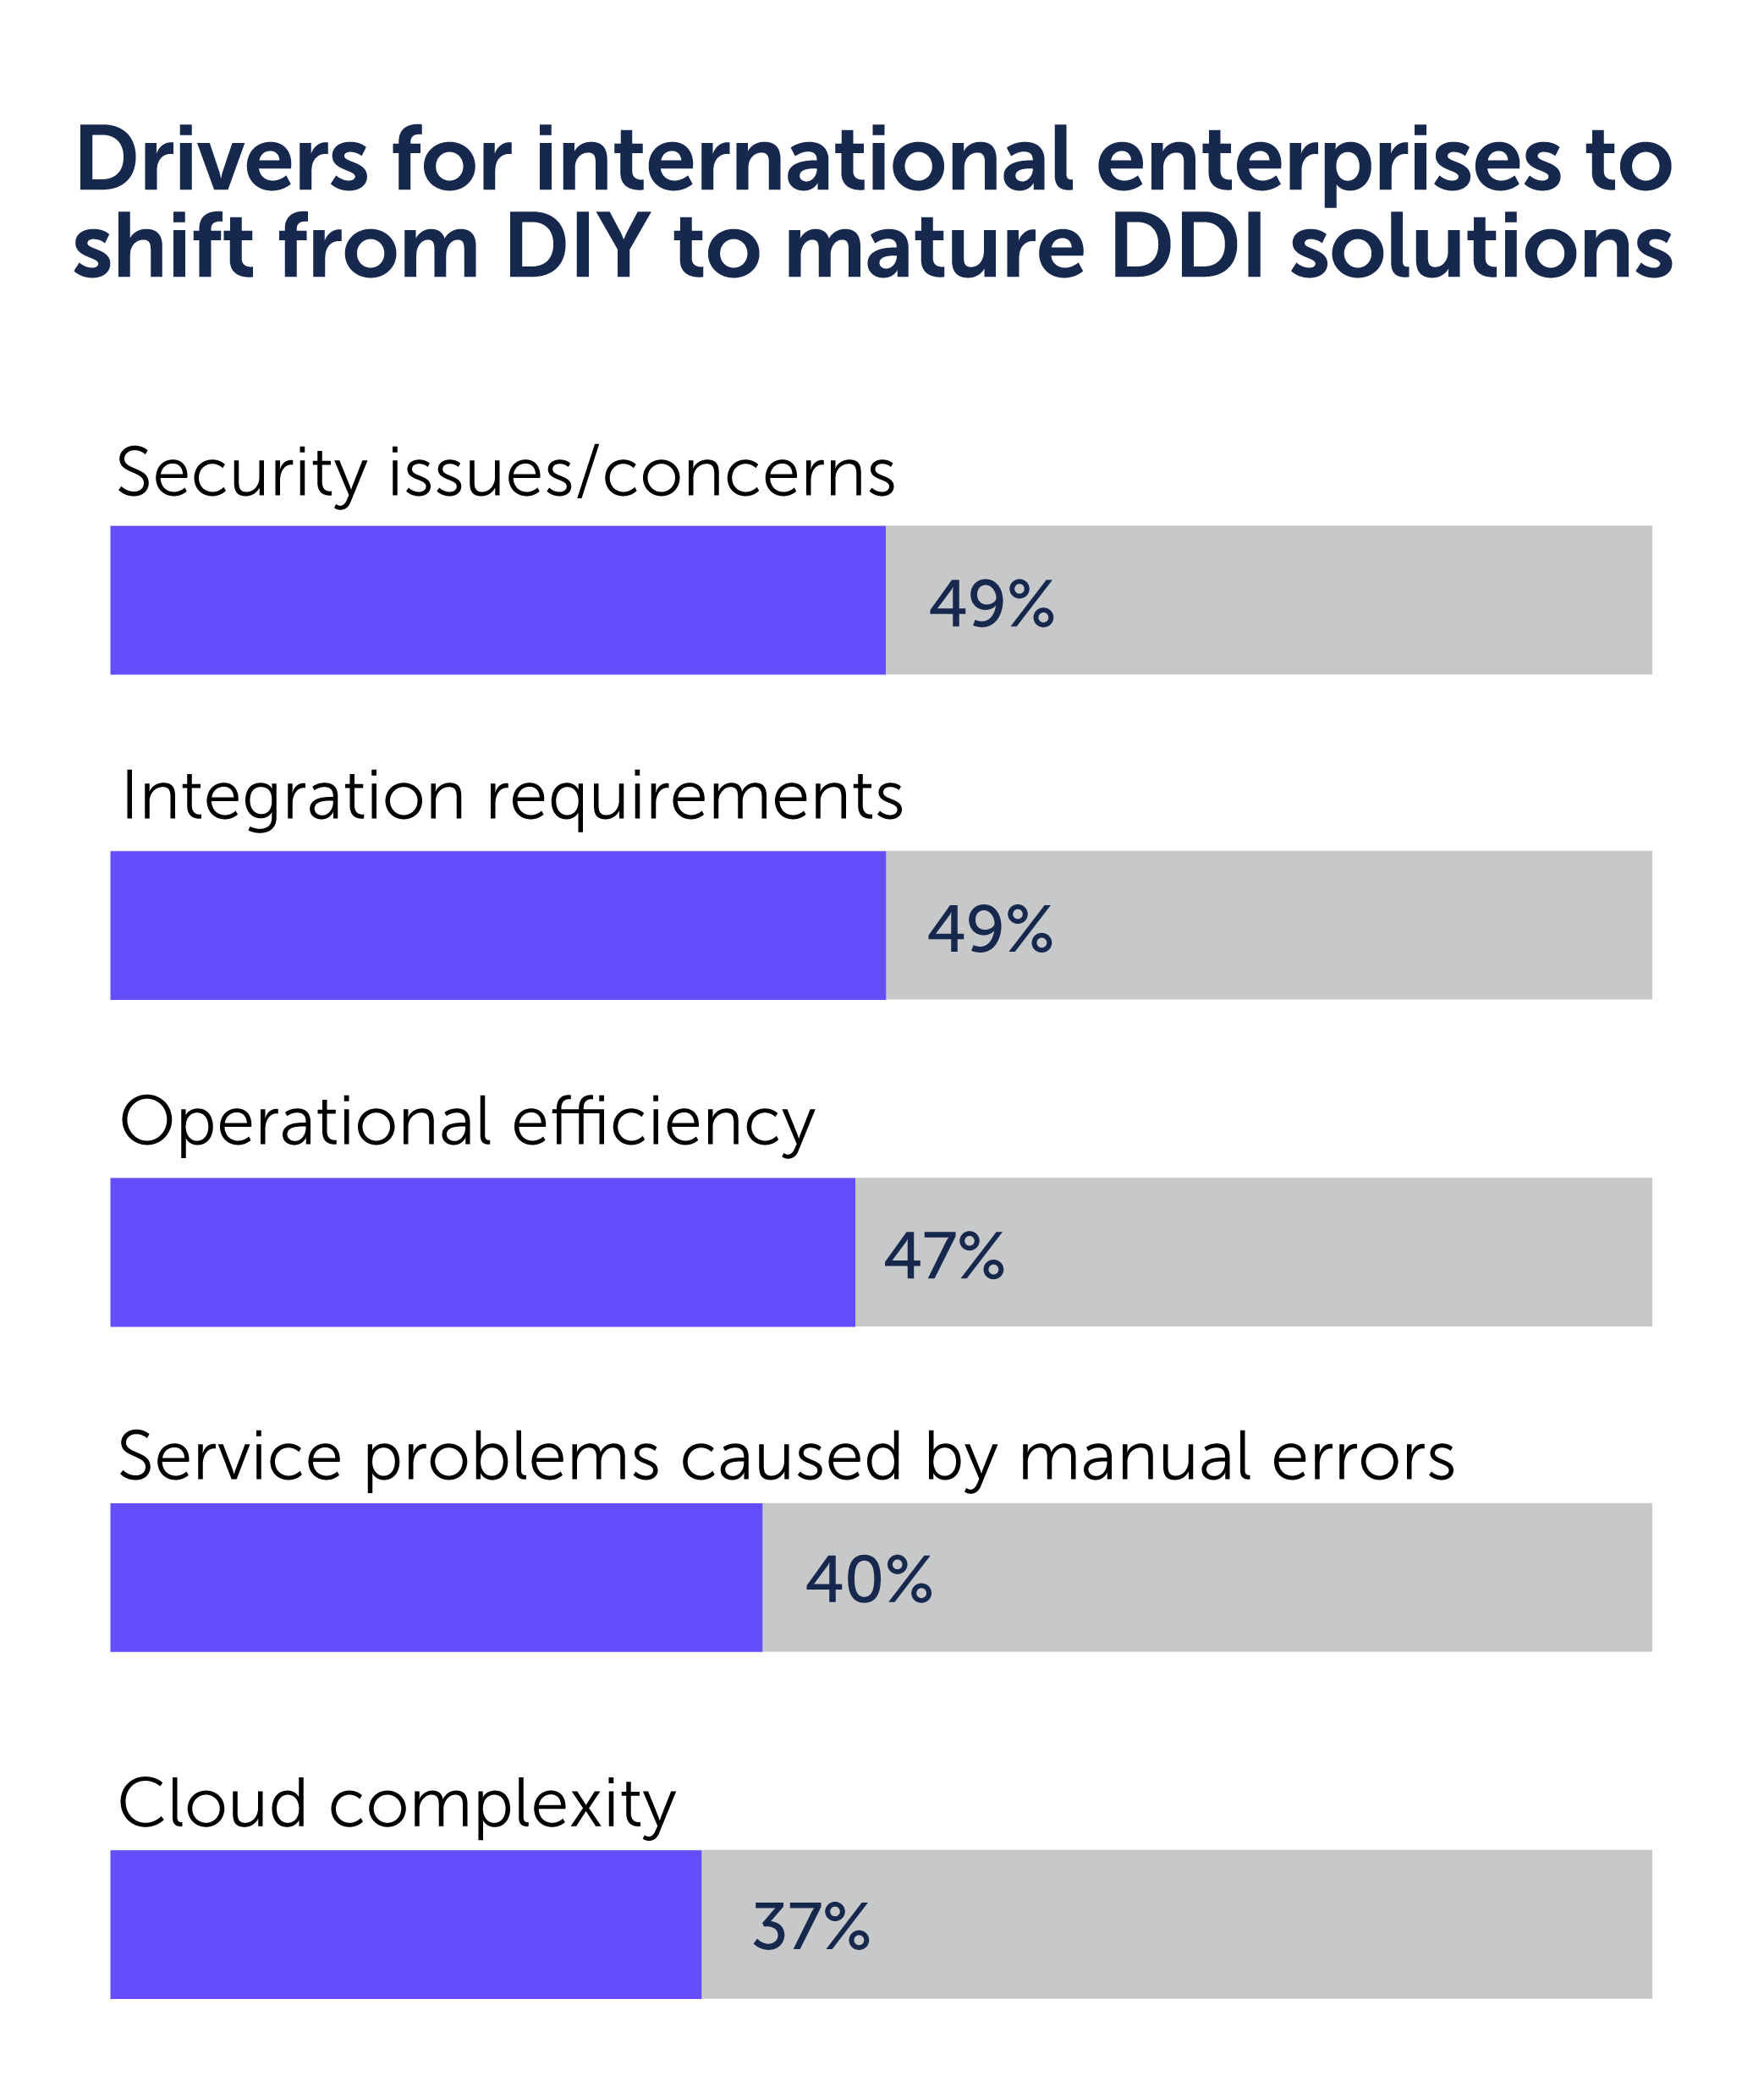 Bar graph of drivers for international enterprises to shift from DIY to mature DDI solutions